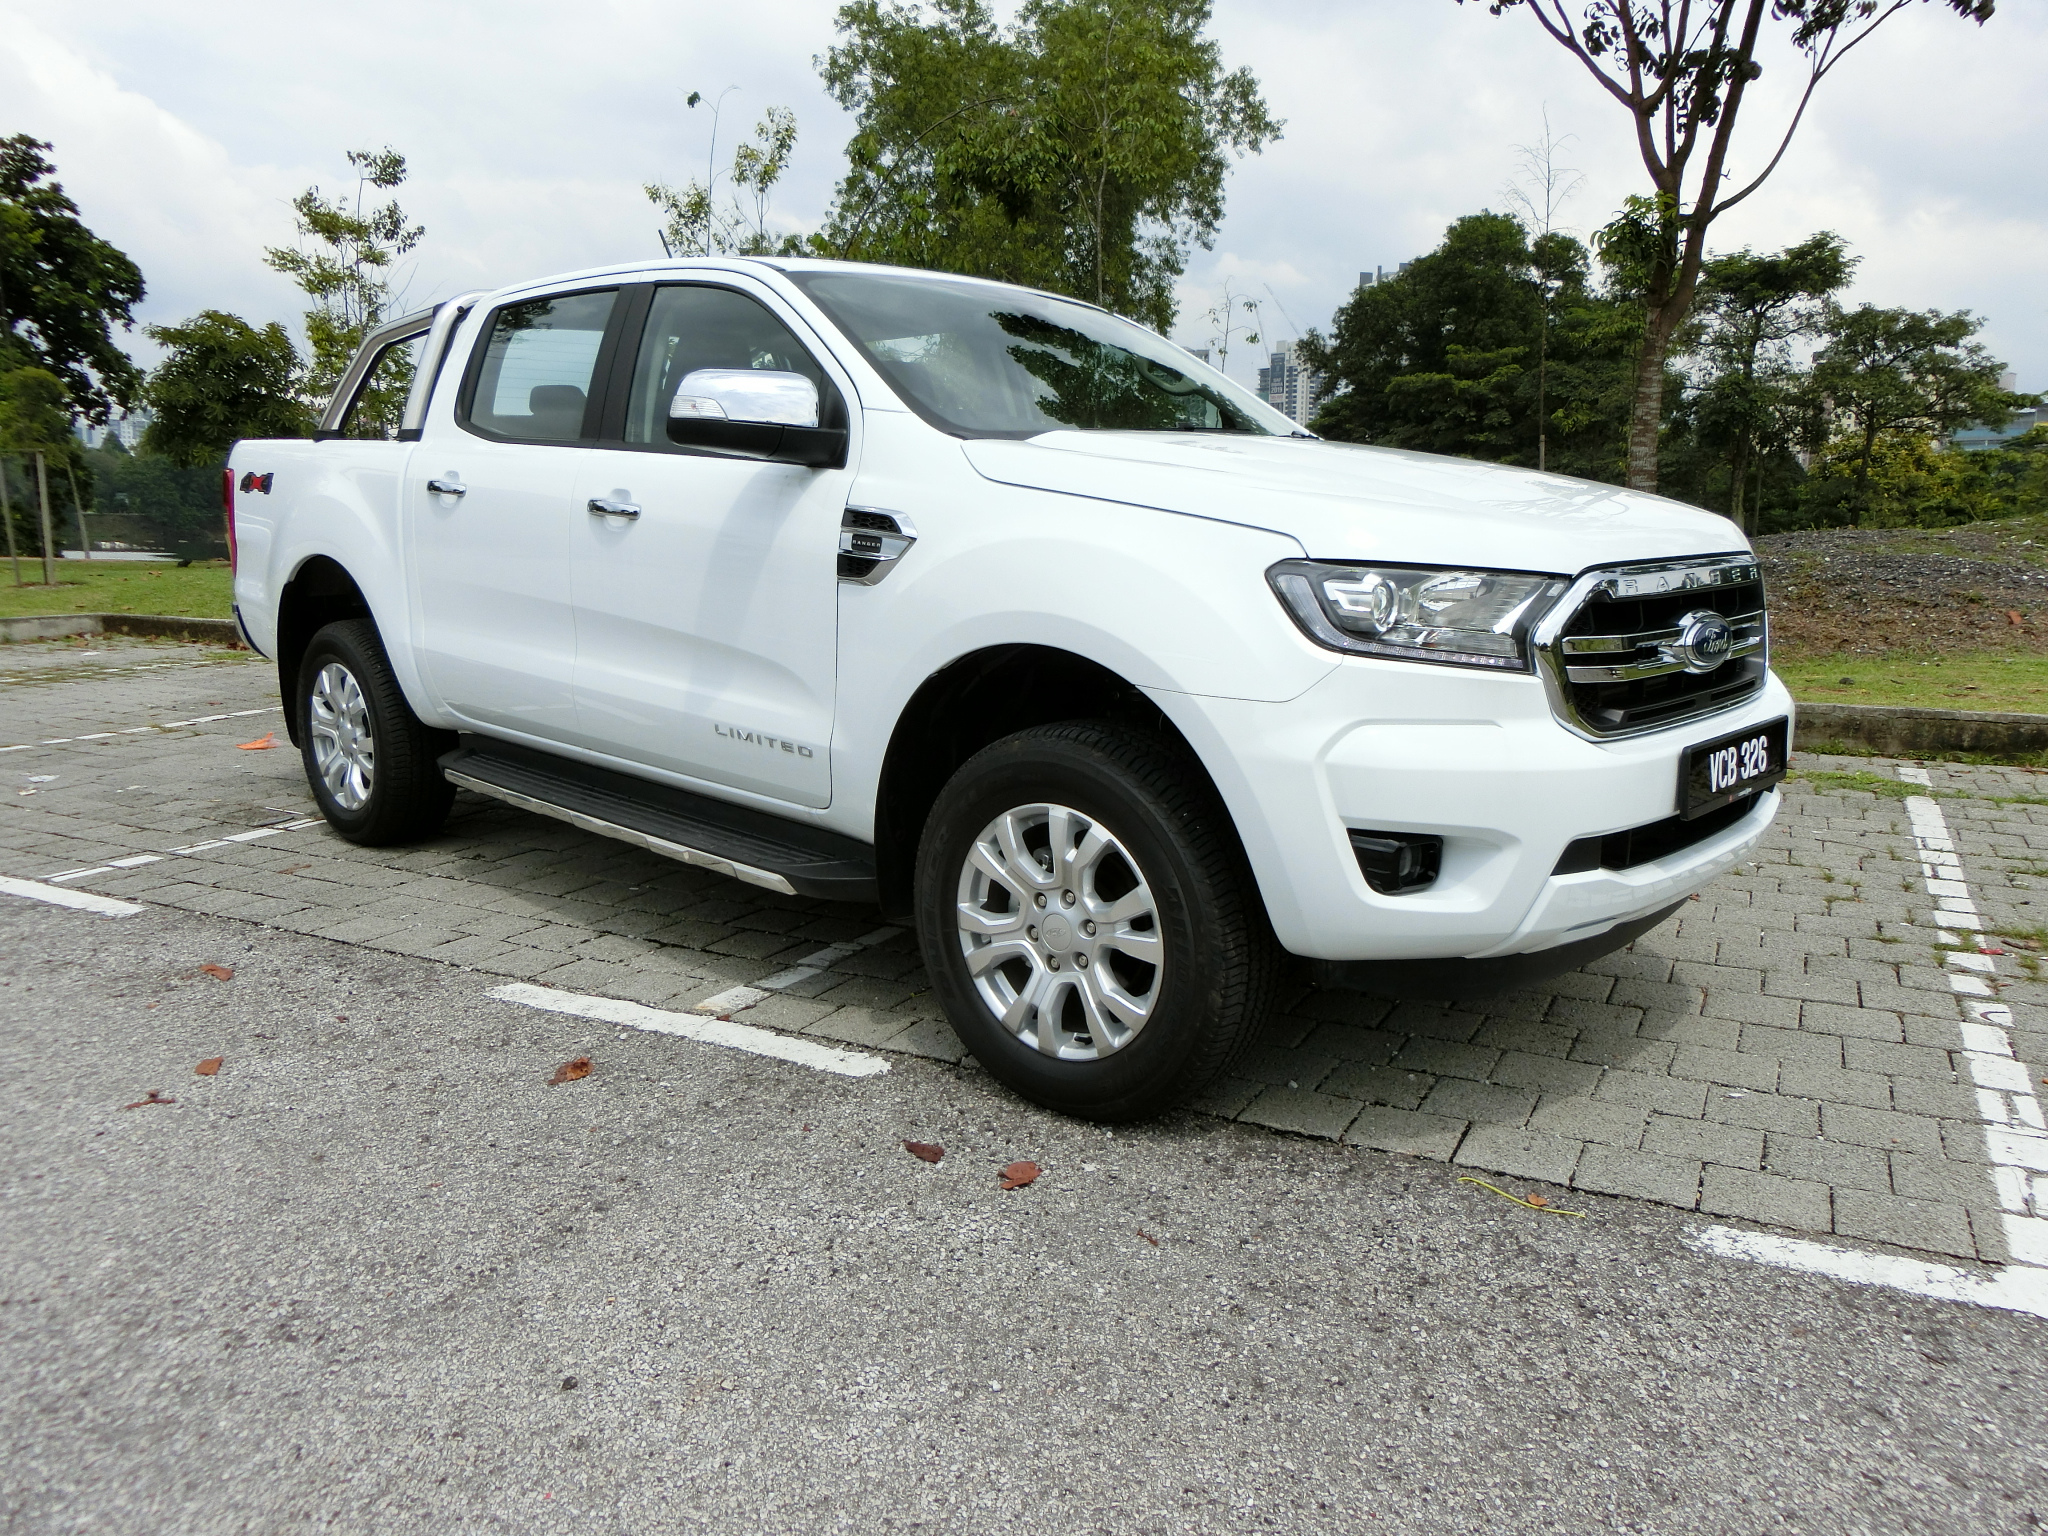 Friday Feature The Allure Of The Ford Ranger 4x4 News And Reviews On Malaysian Cars Motorcycles And Automotive Lifestyle